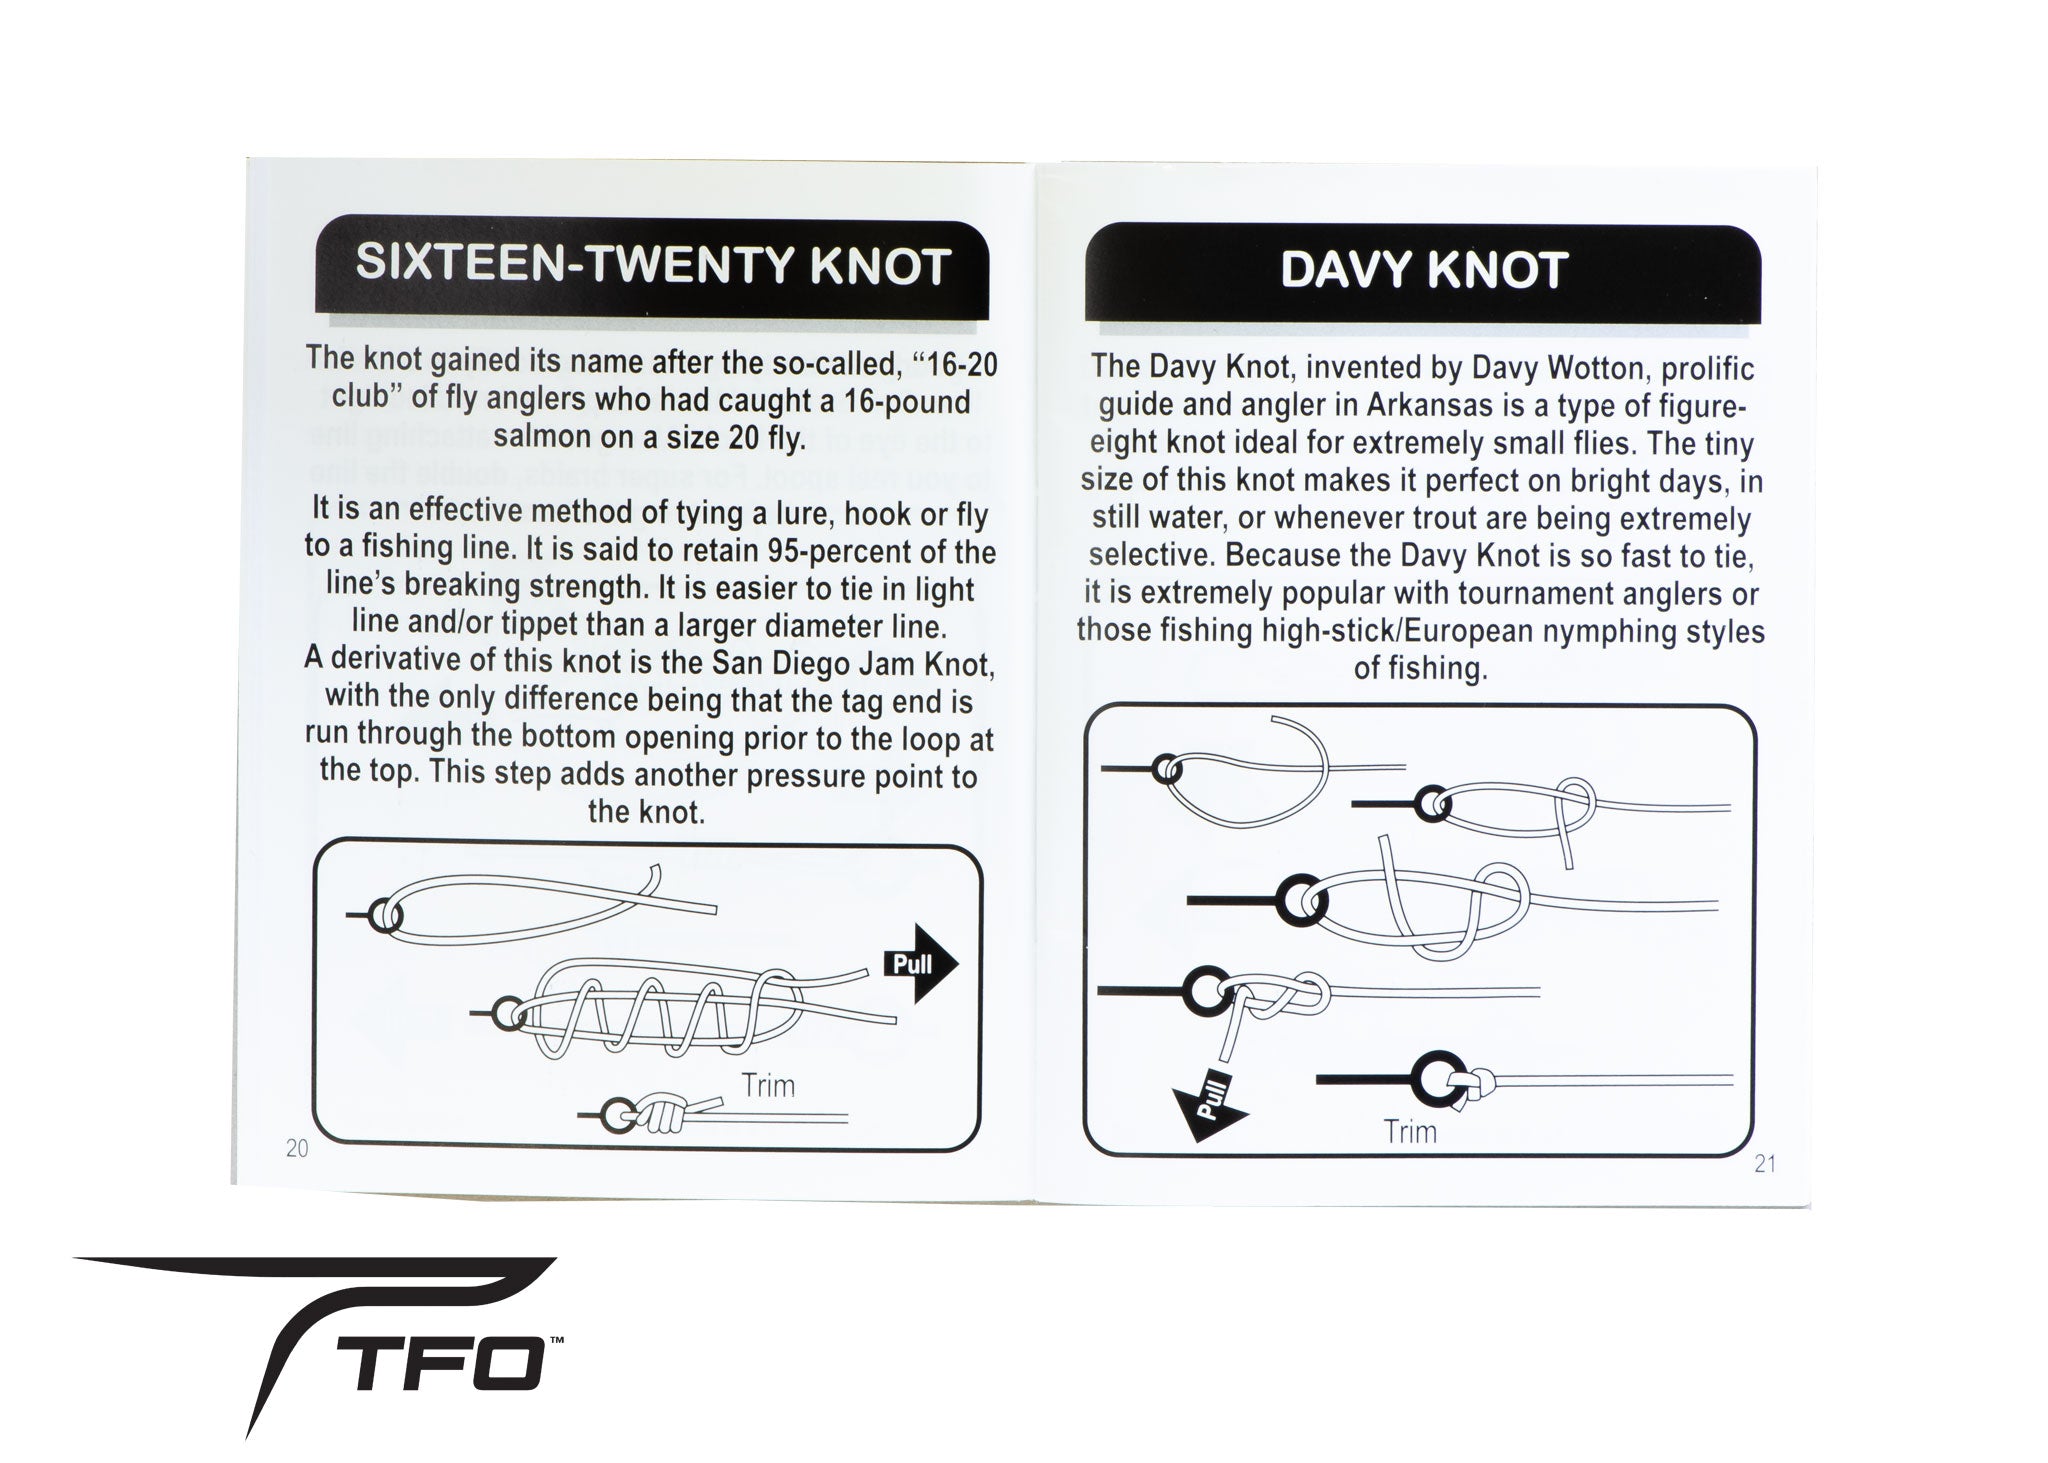 fishing knot diagrams : from The Little Red Fishing Book by Harry